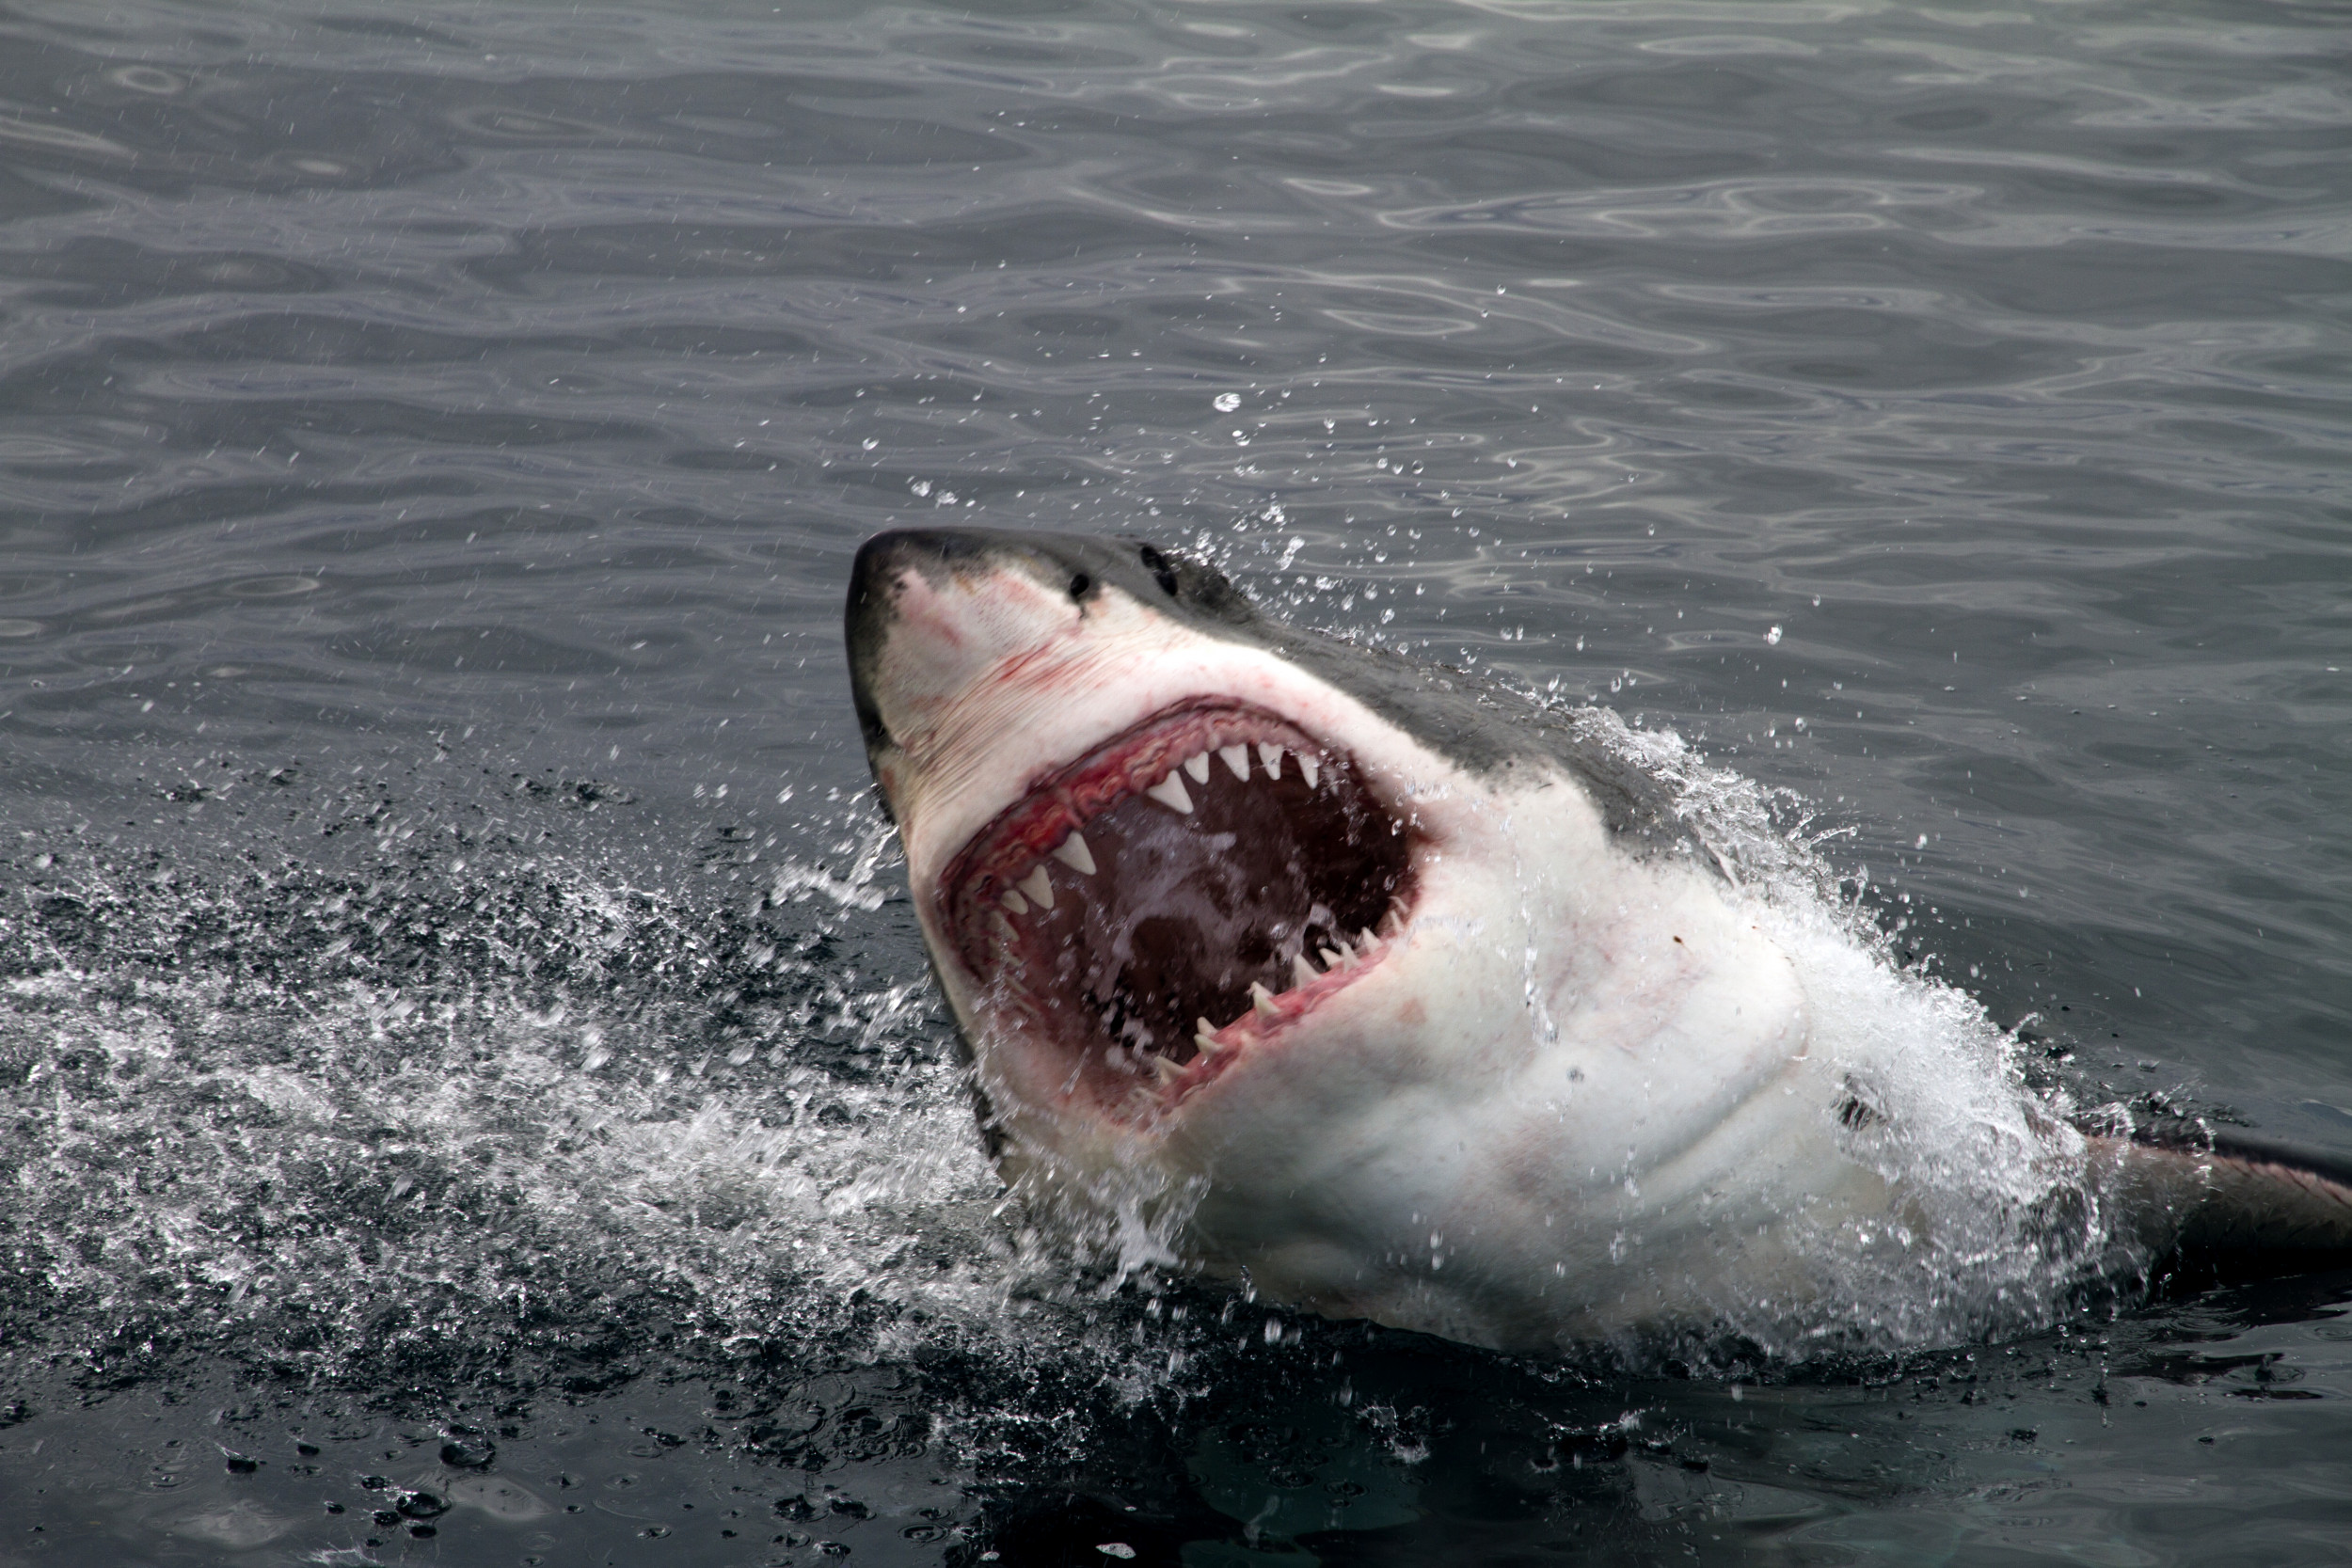 Giant Great White Shark Now Just 20 Miles Off the North Carolina Coast